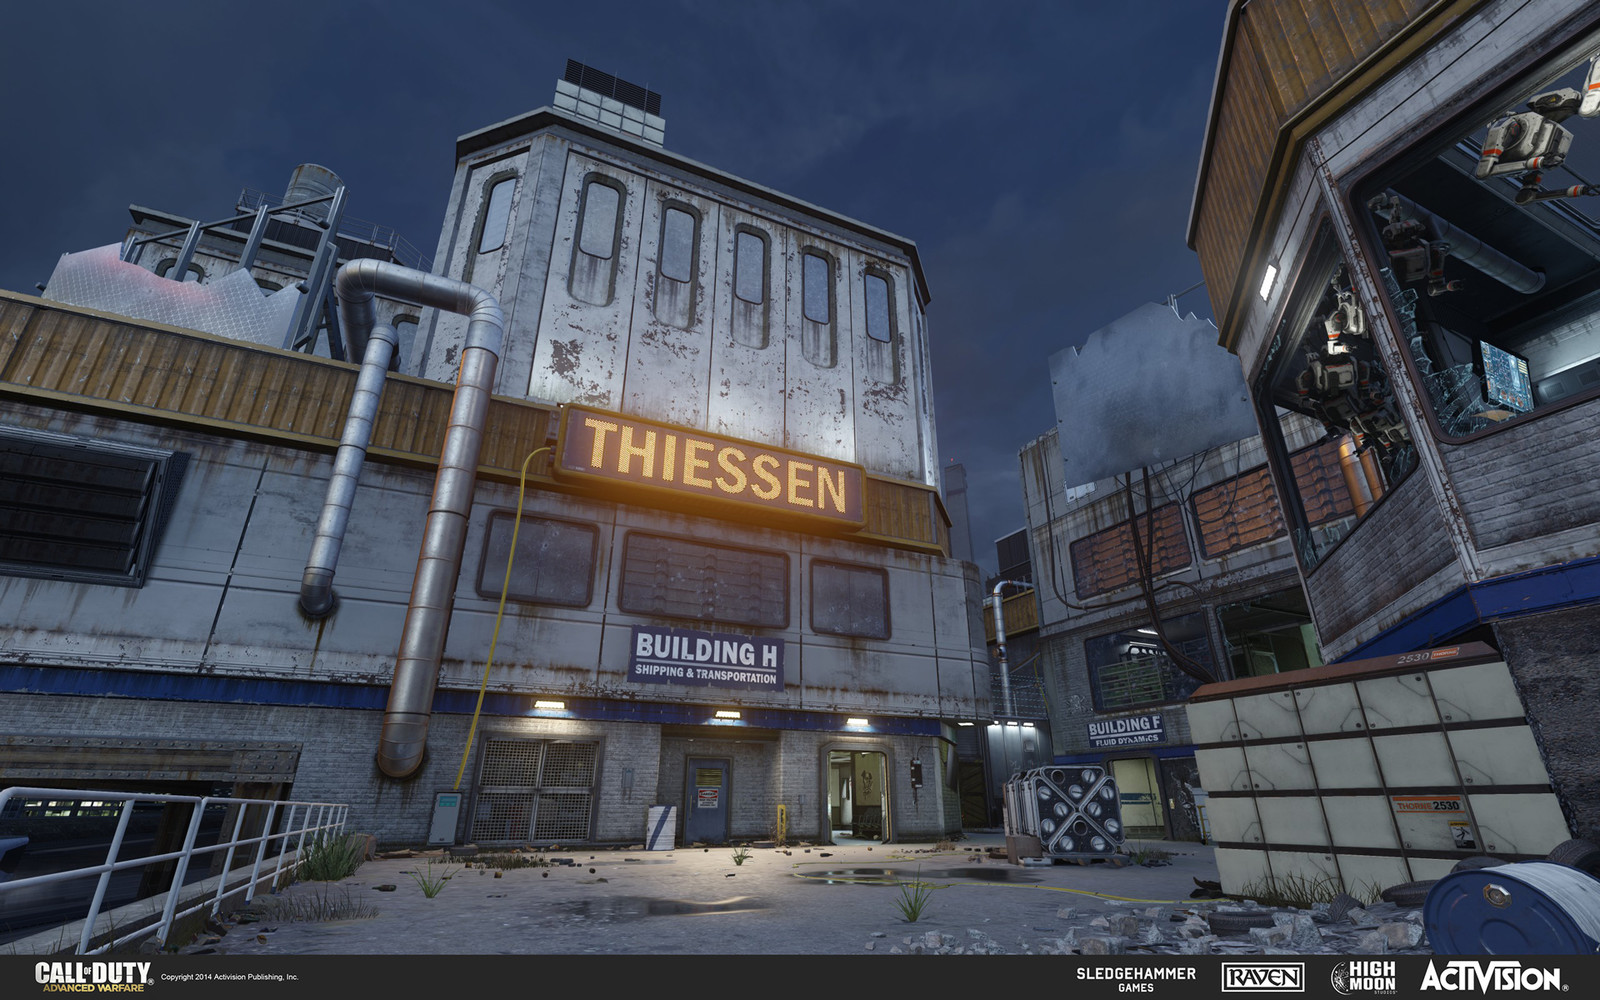 Responsible for back left building. World geo / texture application, created water corrugated metal / water puddles, and "Thiessen" sign prop. Lighting by Susan Devenero.